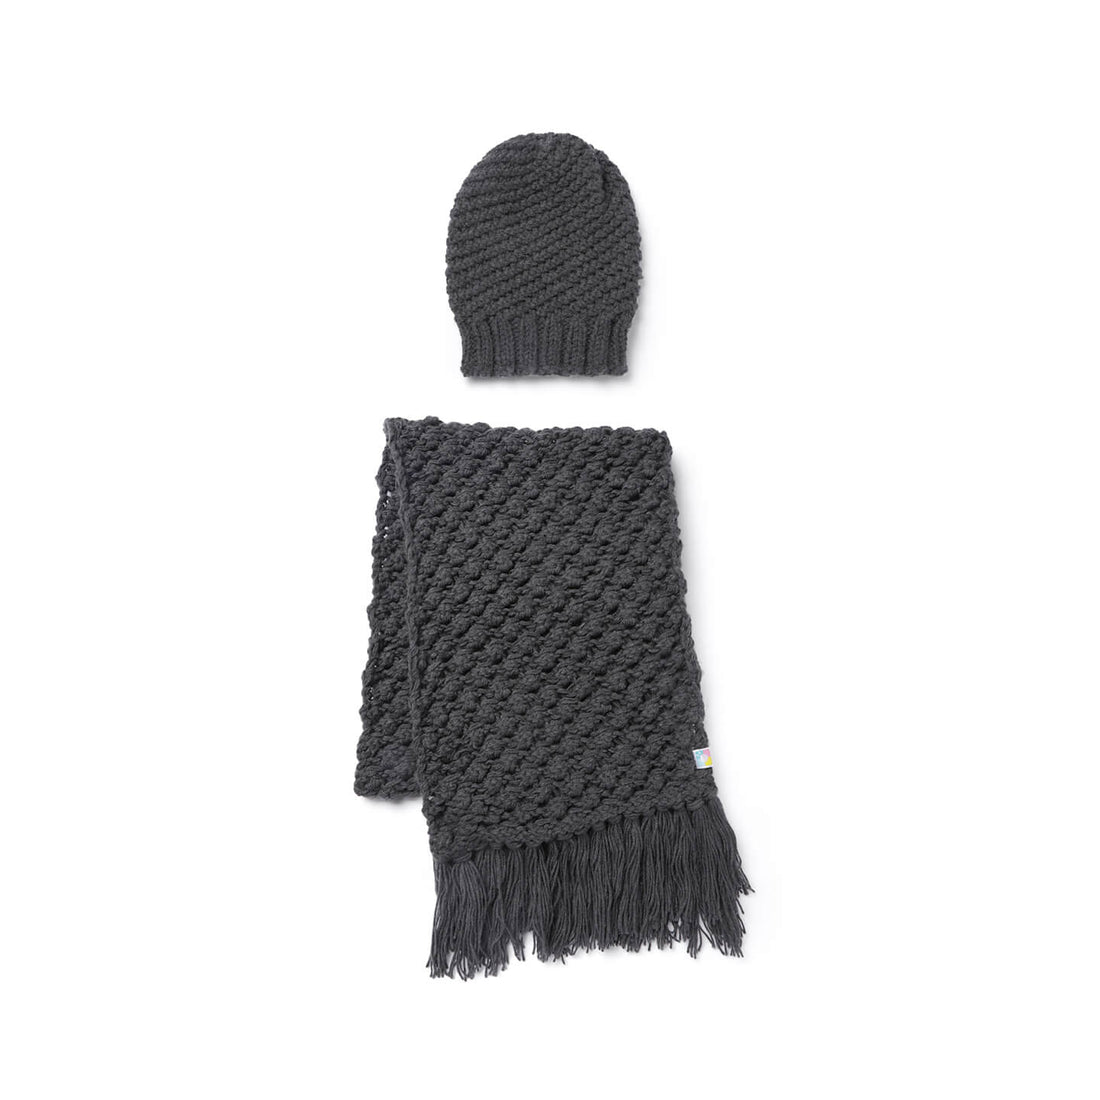 Beanie and Scarf Coordinating Set - 3222